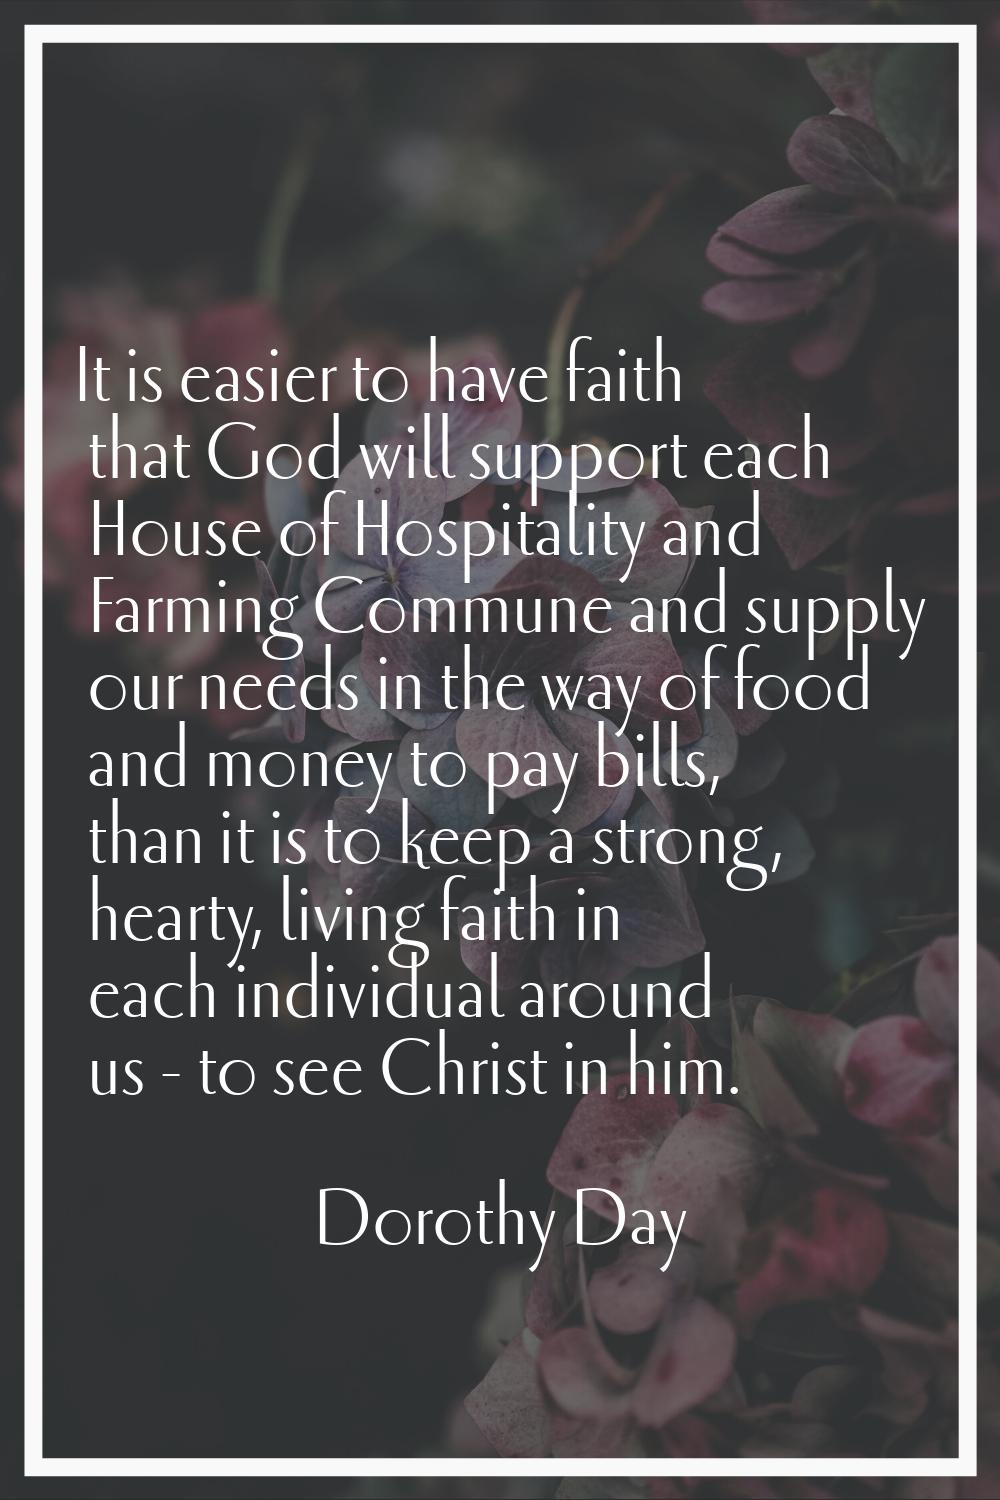 It is easier to have faith that God will support each House of Hospitality and Farming Commune and 